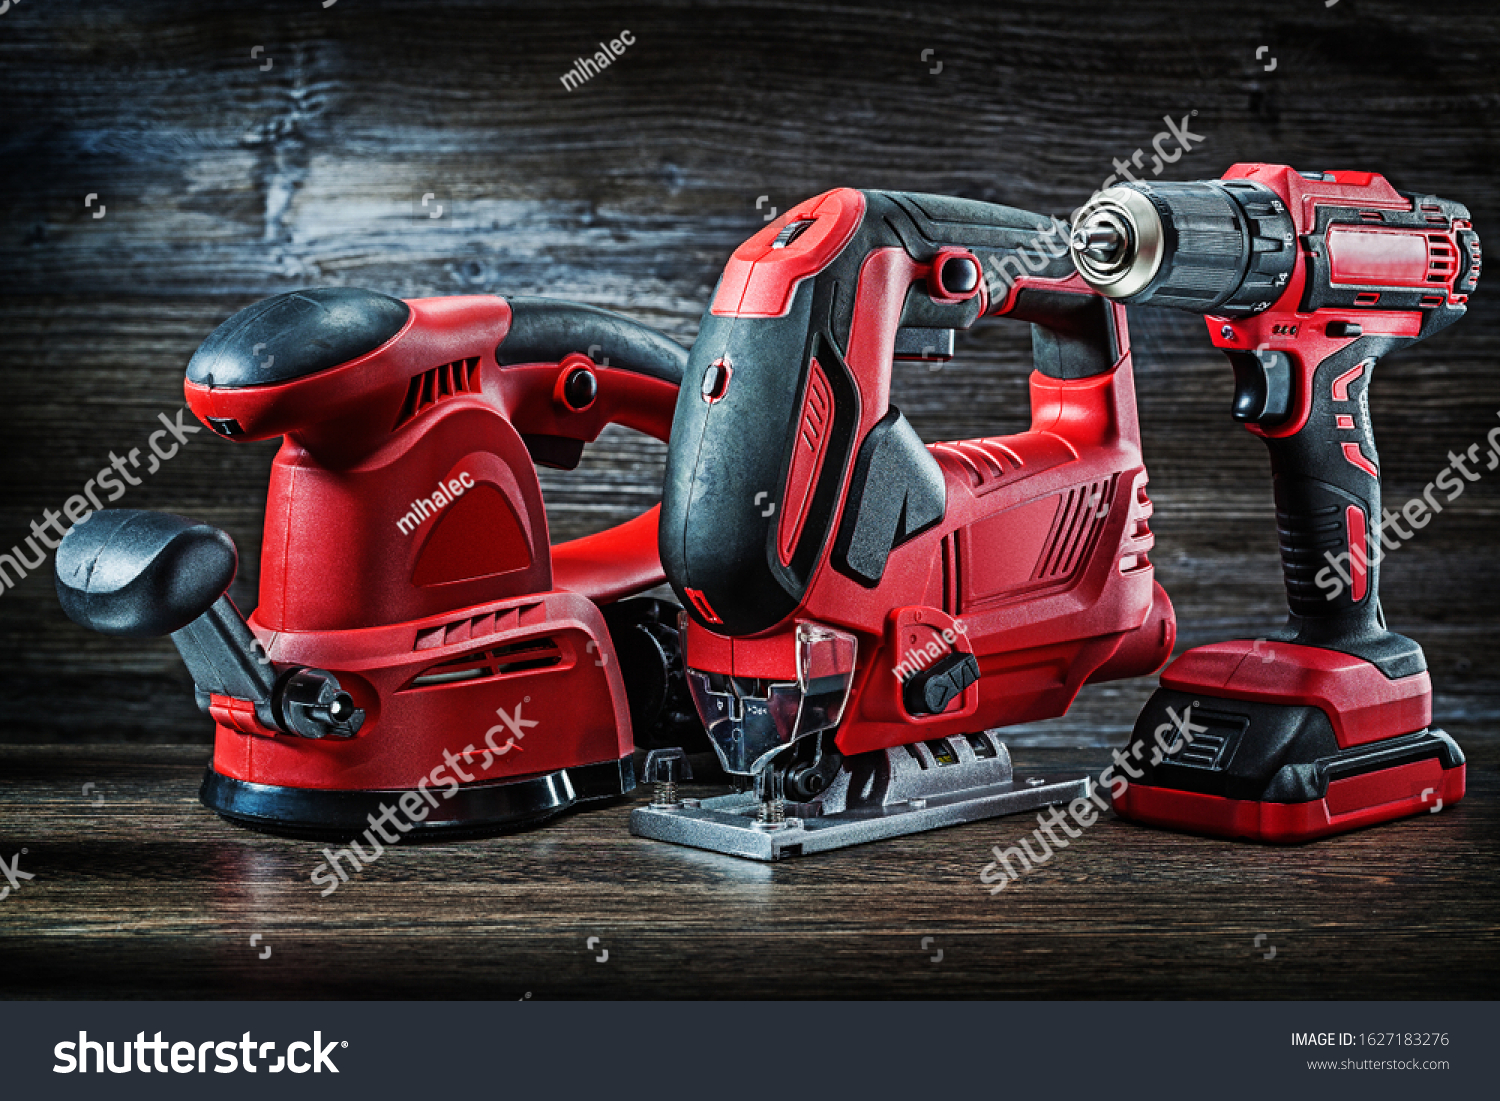 electric hand tools red corded jigsaw cordless drill and speed variable power small plunge router milling machine portable mini wood router on vintage wooden background #1627183276